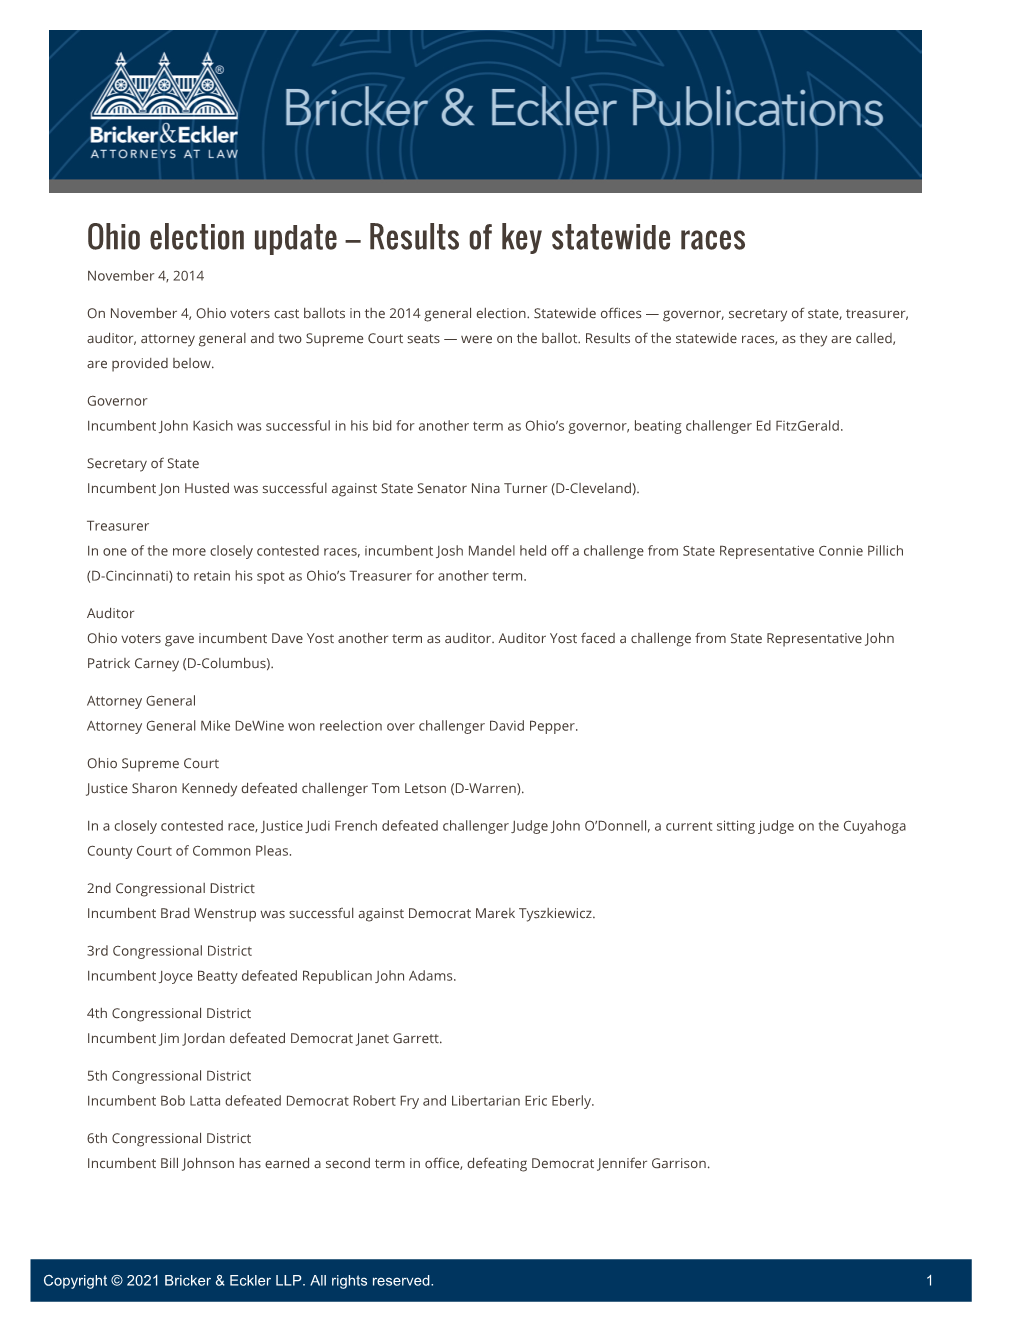 Ohio Election Update – Results of Key Statewide Races November 4, 2014